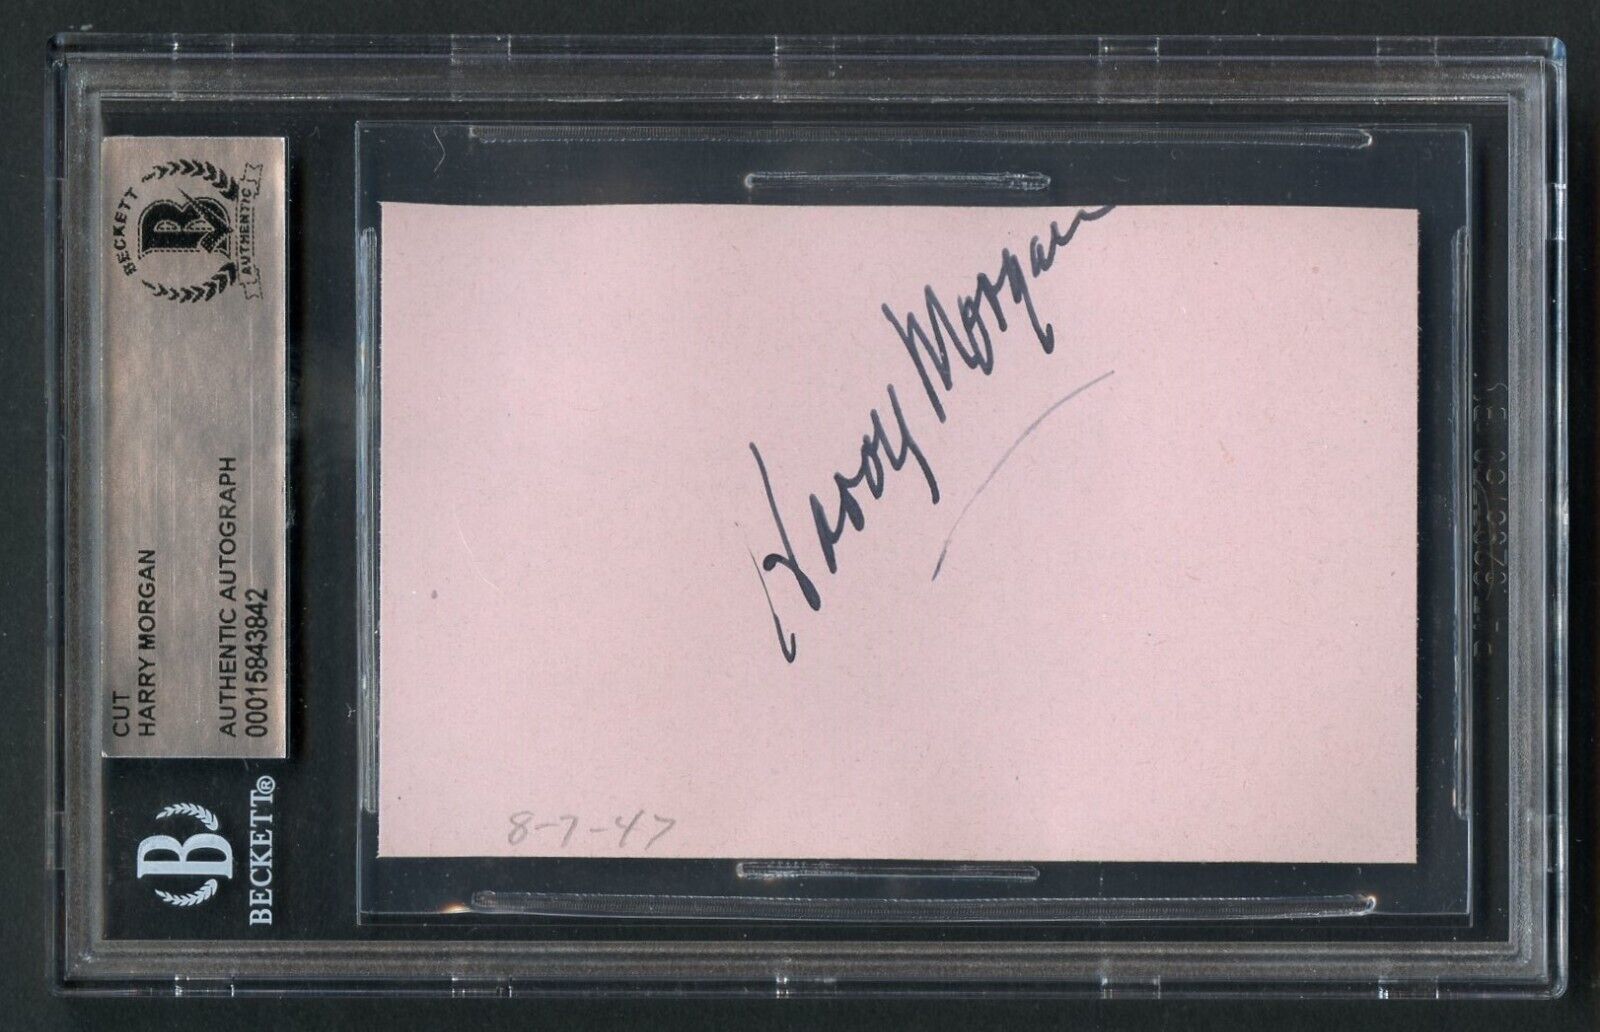 Harry Morgan d2011 signed on 8-7-47 autograph 2x3 cut Actor in MASH &Dragnet BAS